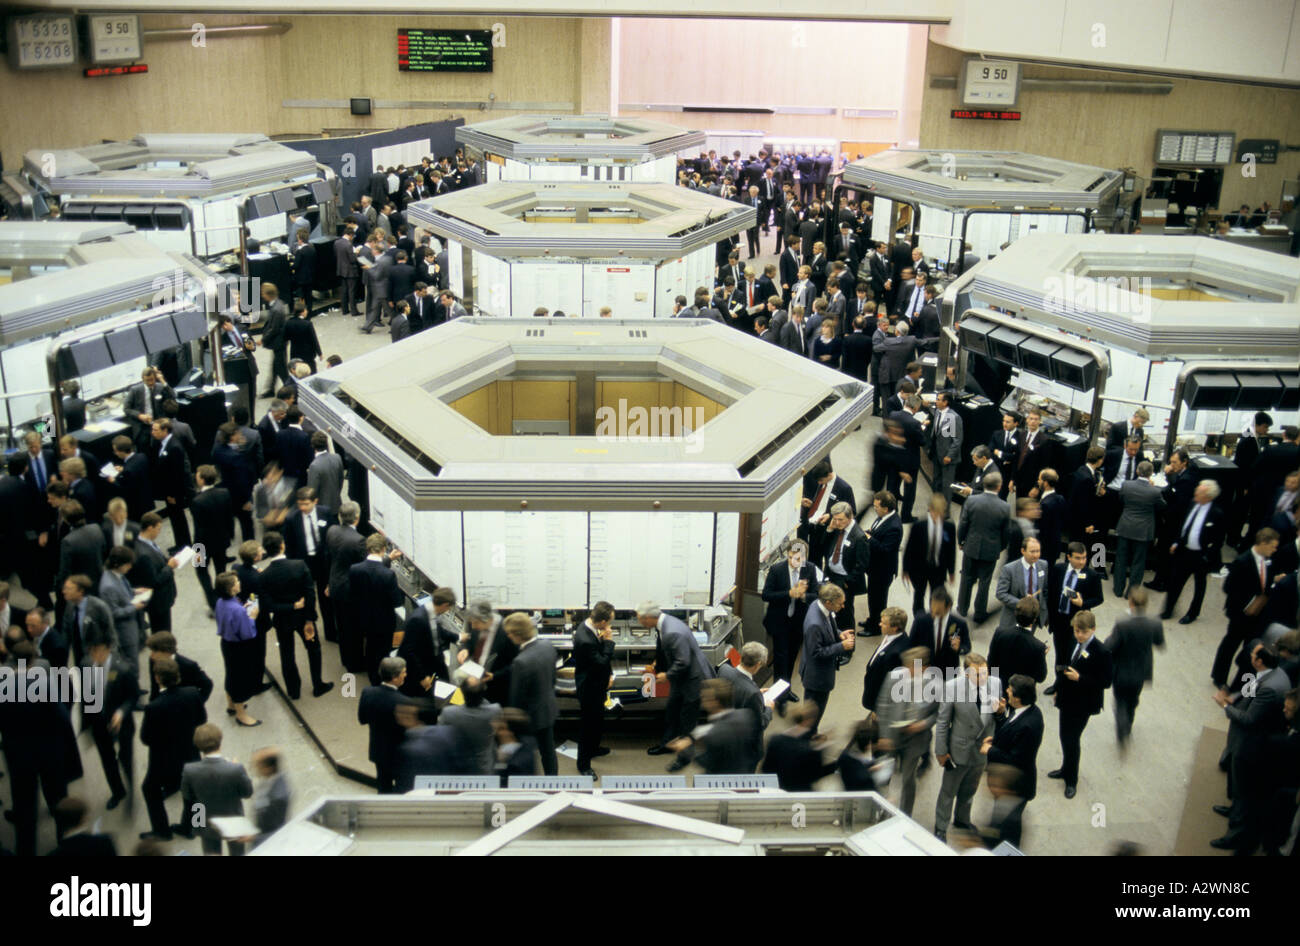 Stockbrokers On The Trading Floor Of The London Stock Exchange